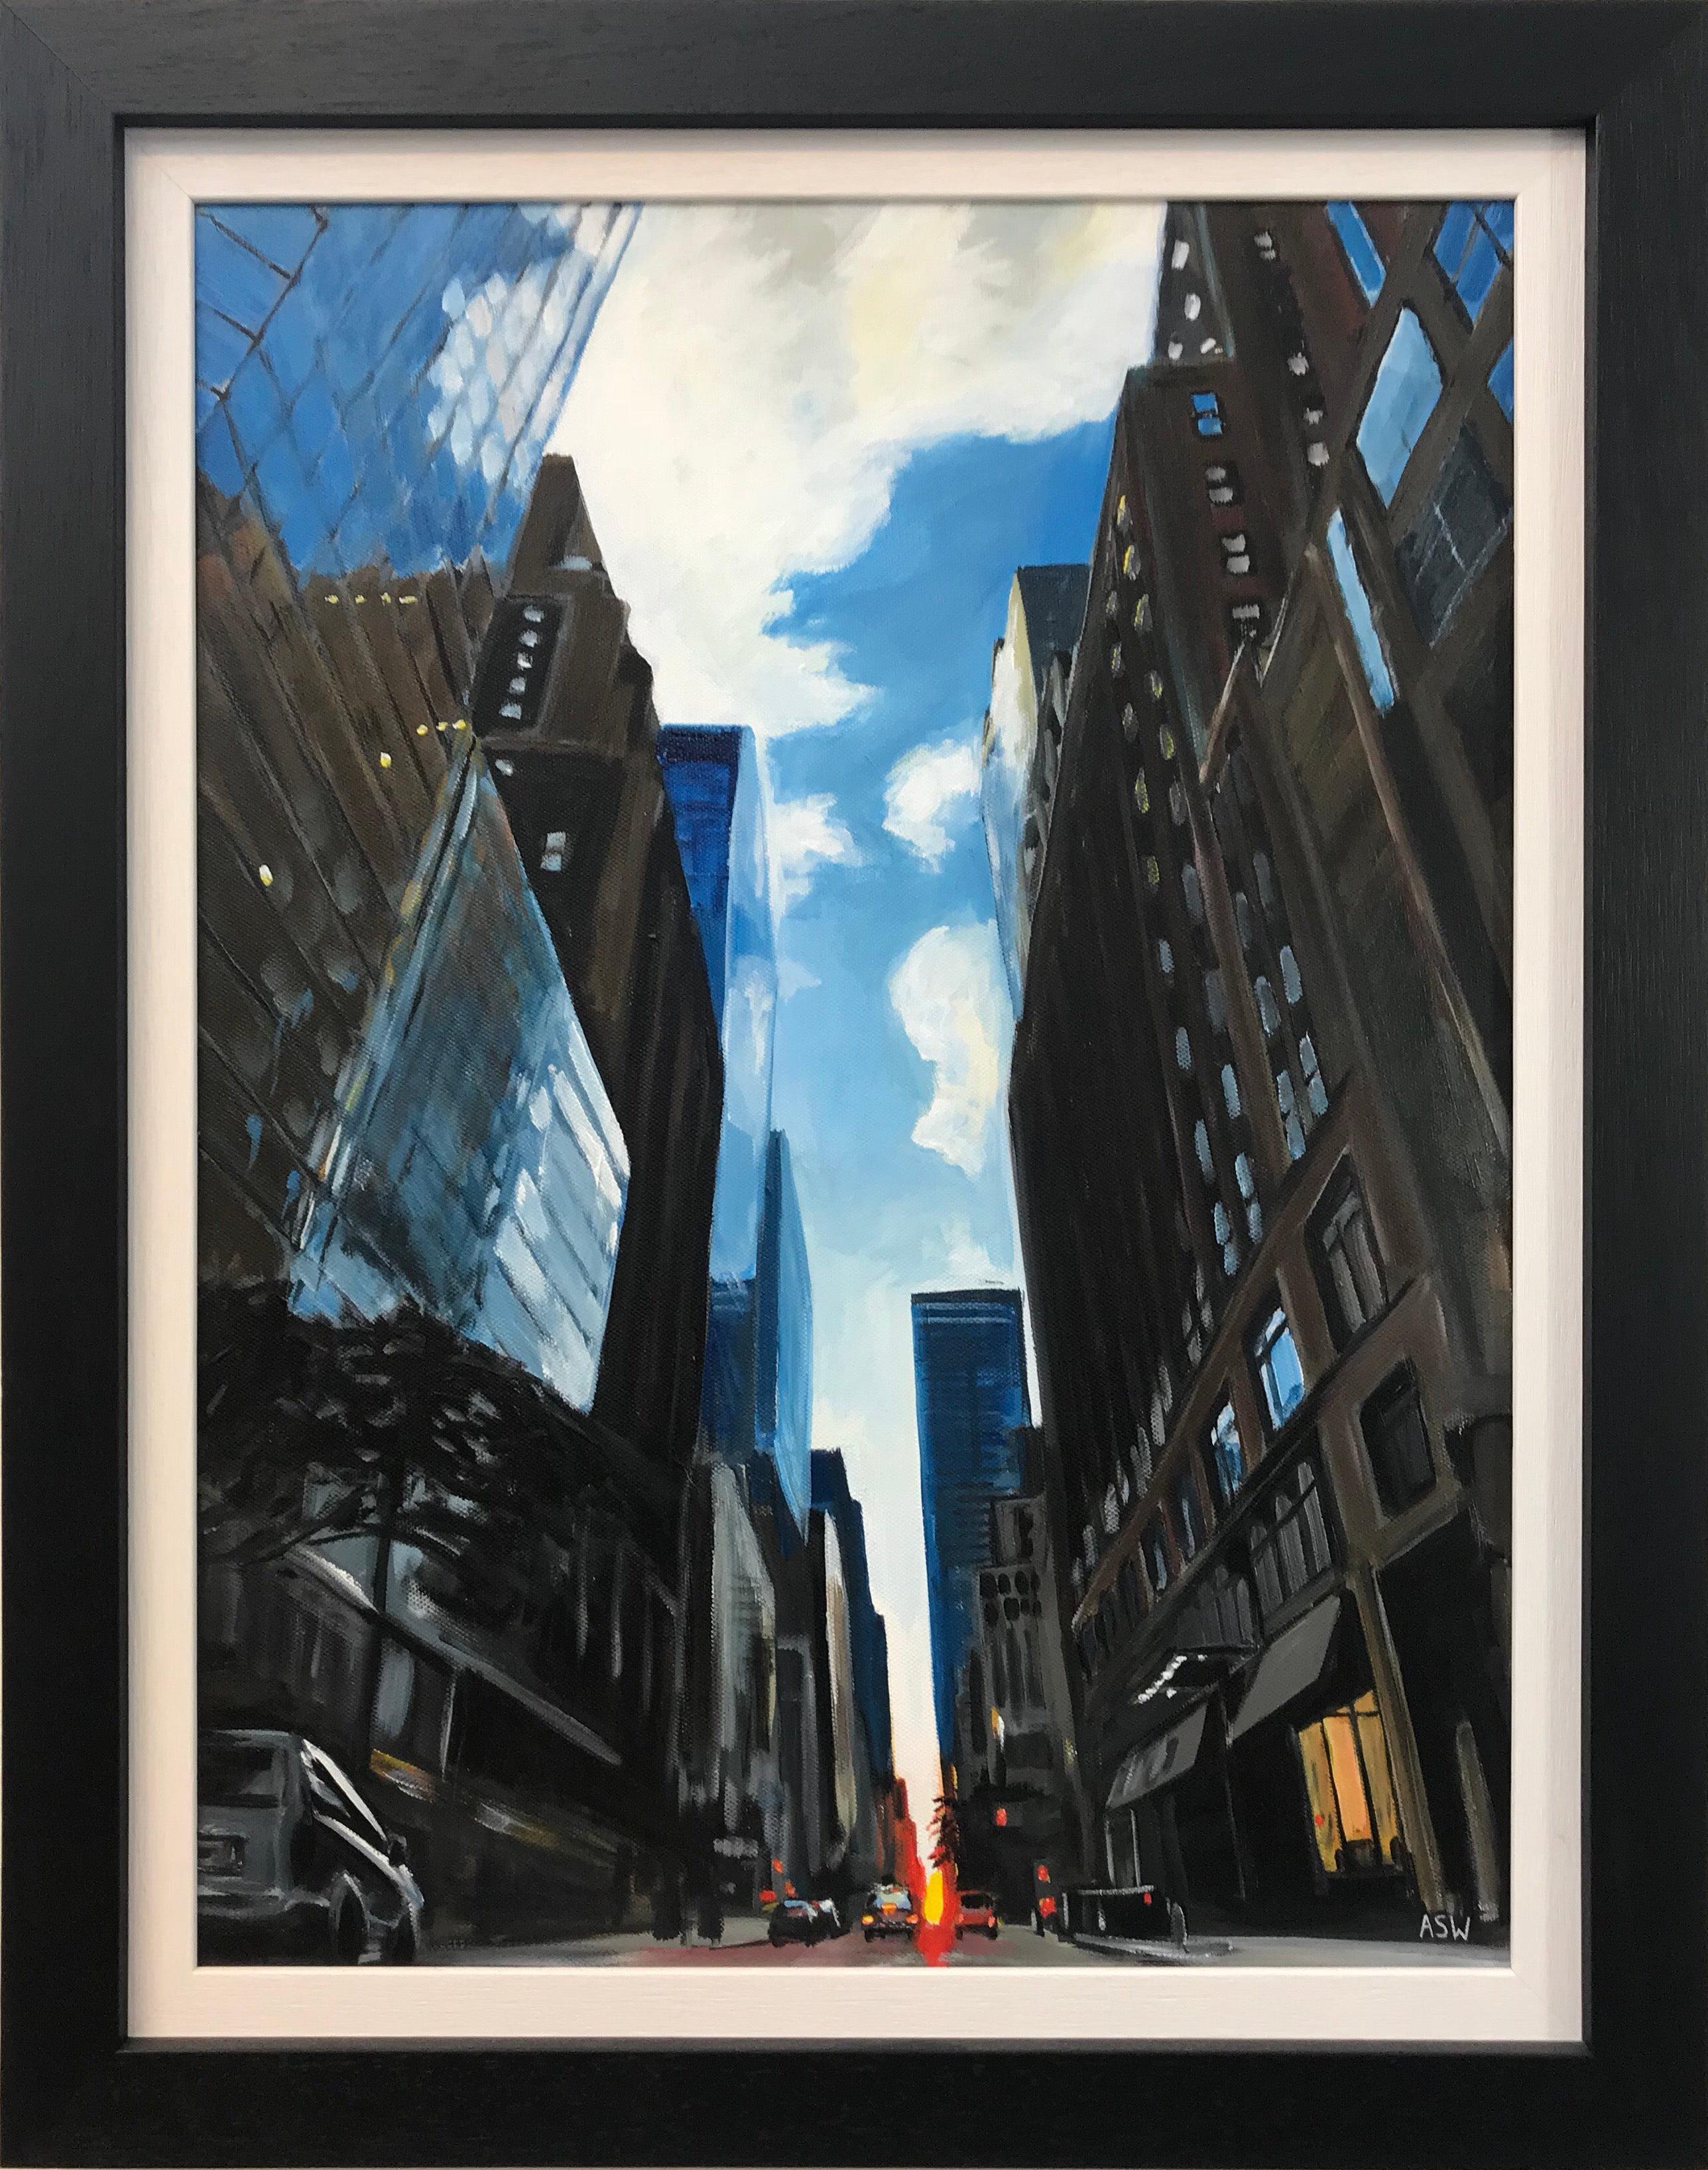 Angela Wakefield Figurative Painting - Painting of Summer Sunset in New York City by Leading British Urban Artist UK